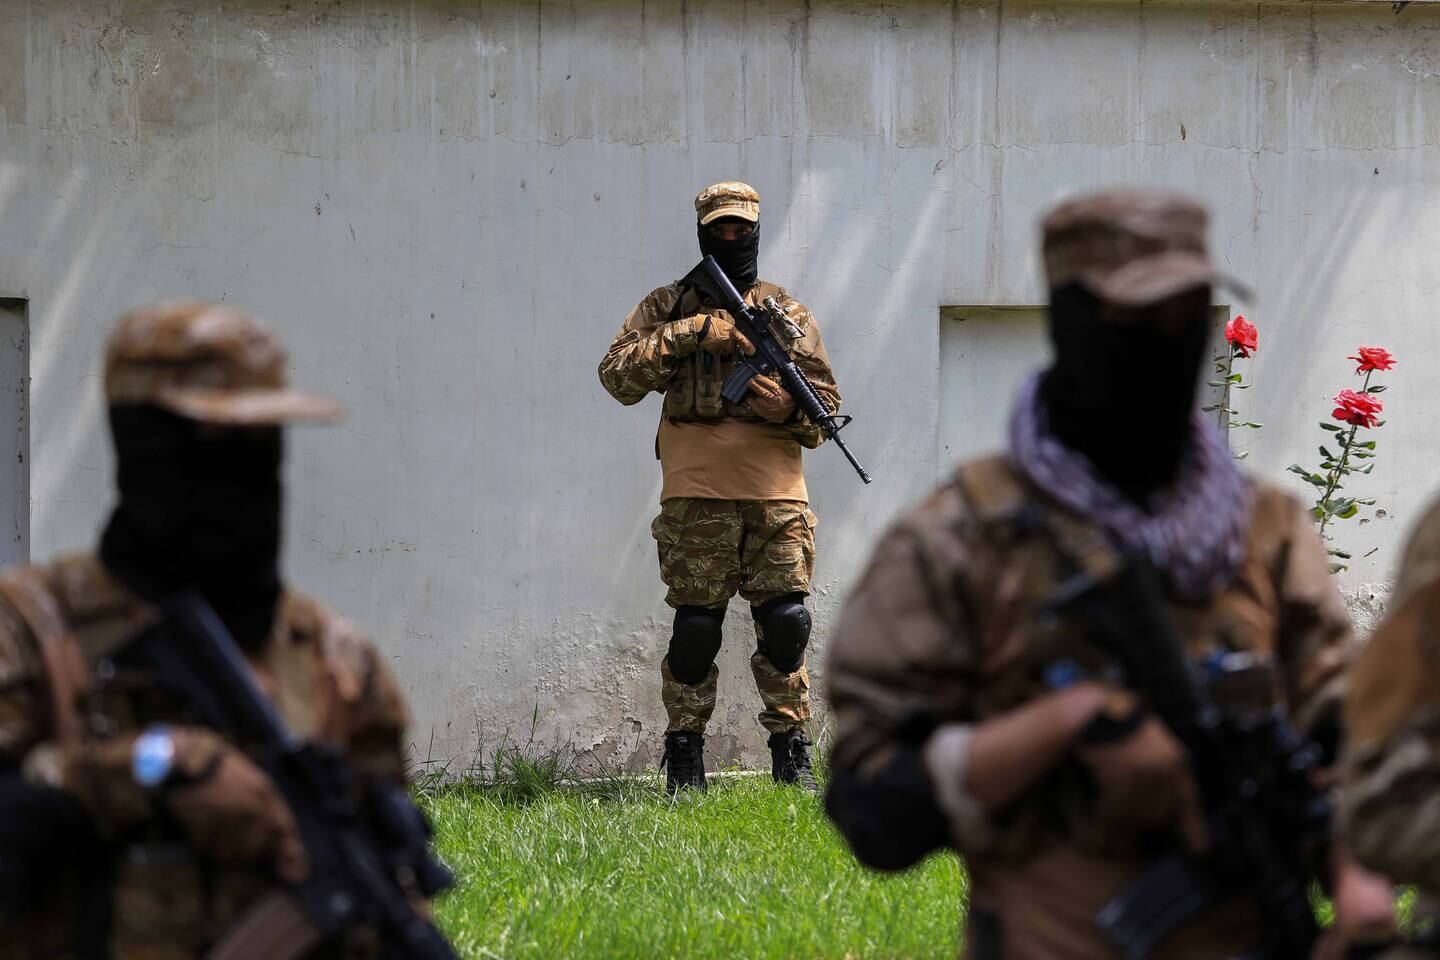 Taliban guards during a ceremony to celebrate the 30th anniversary of the mujahideen victory against the Soviet invasion, in Kabul, Afghanistan, April 28, 2022.  EPA